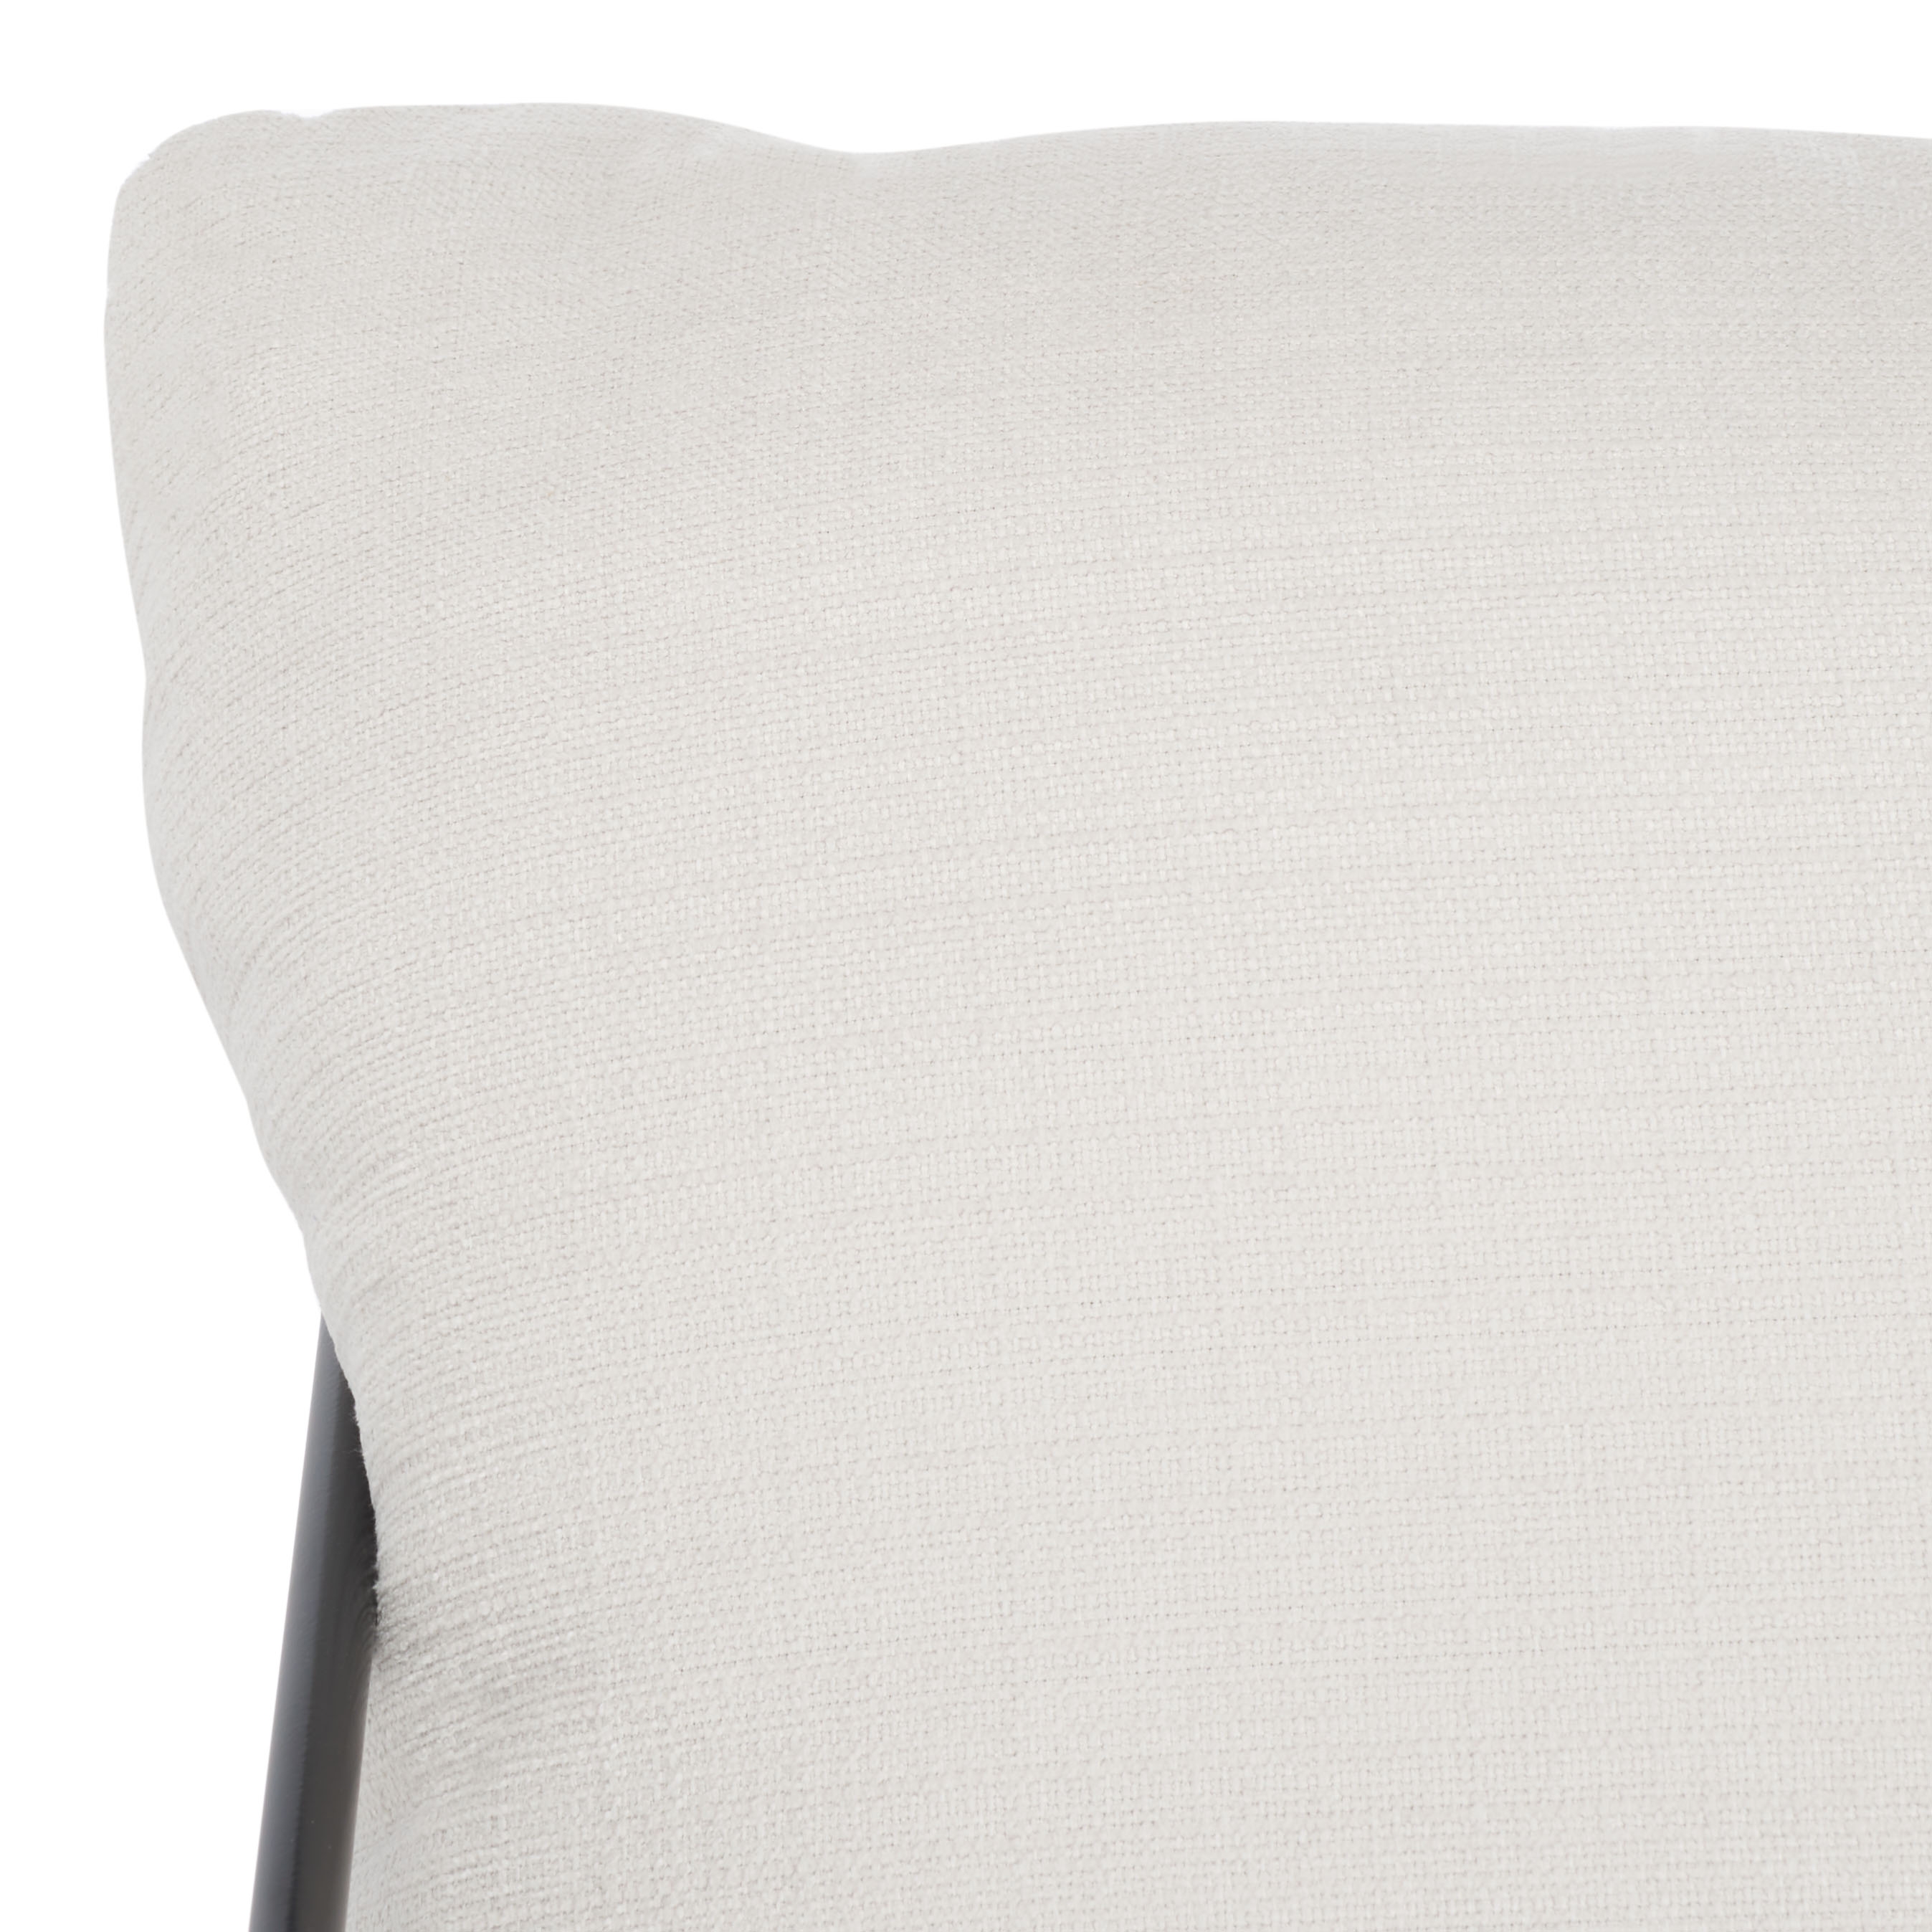 Portland Pillow Top Accent Chair - Ivory/Black - Arlo Home - Image 7